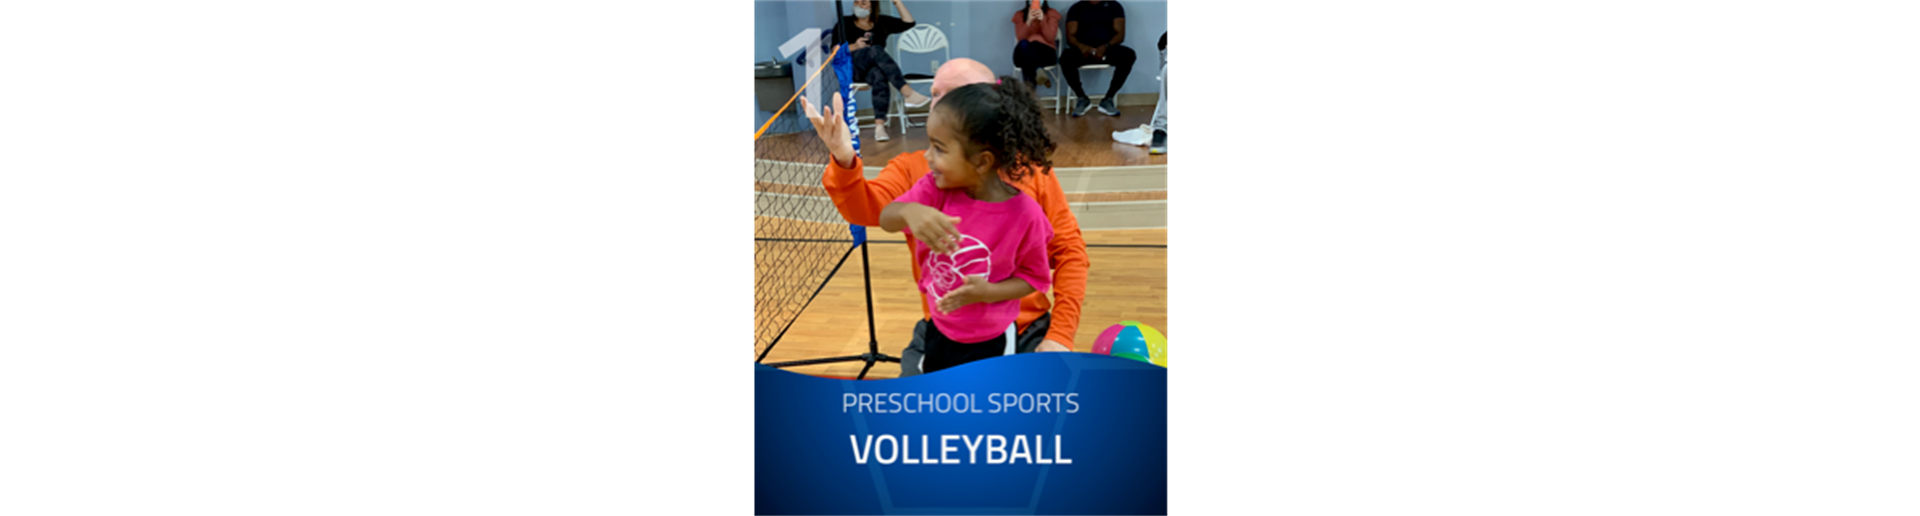 Tot Fall/Winter Volleyball Classes(Ages 3-5)